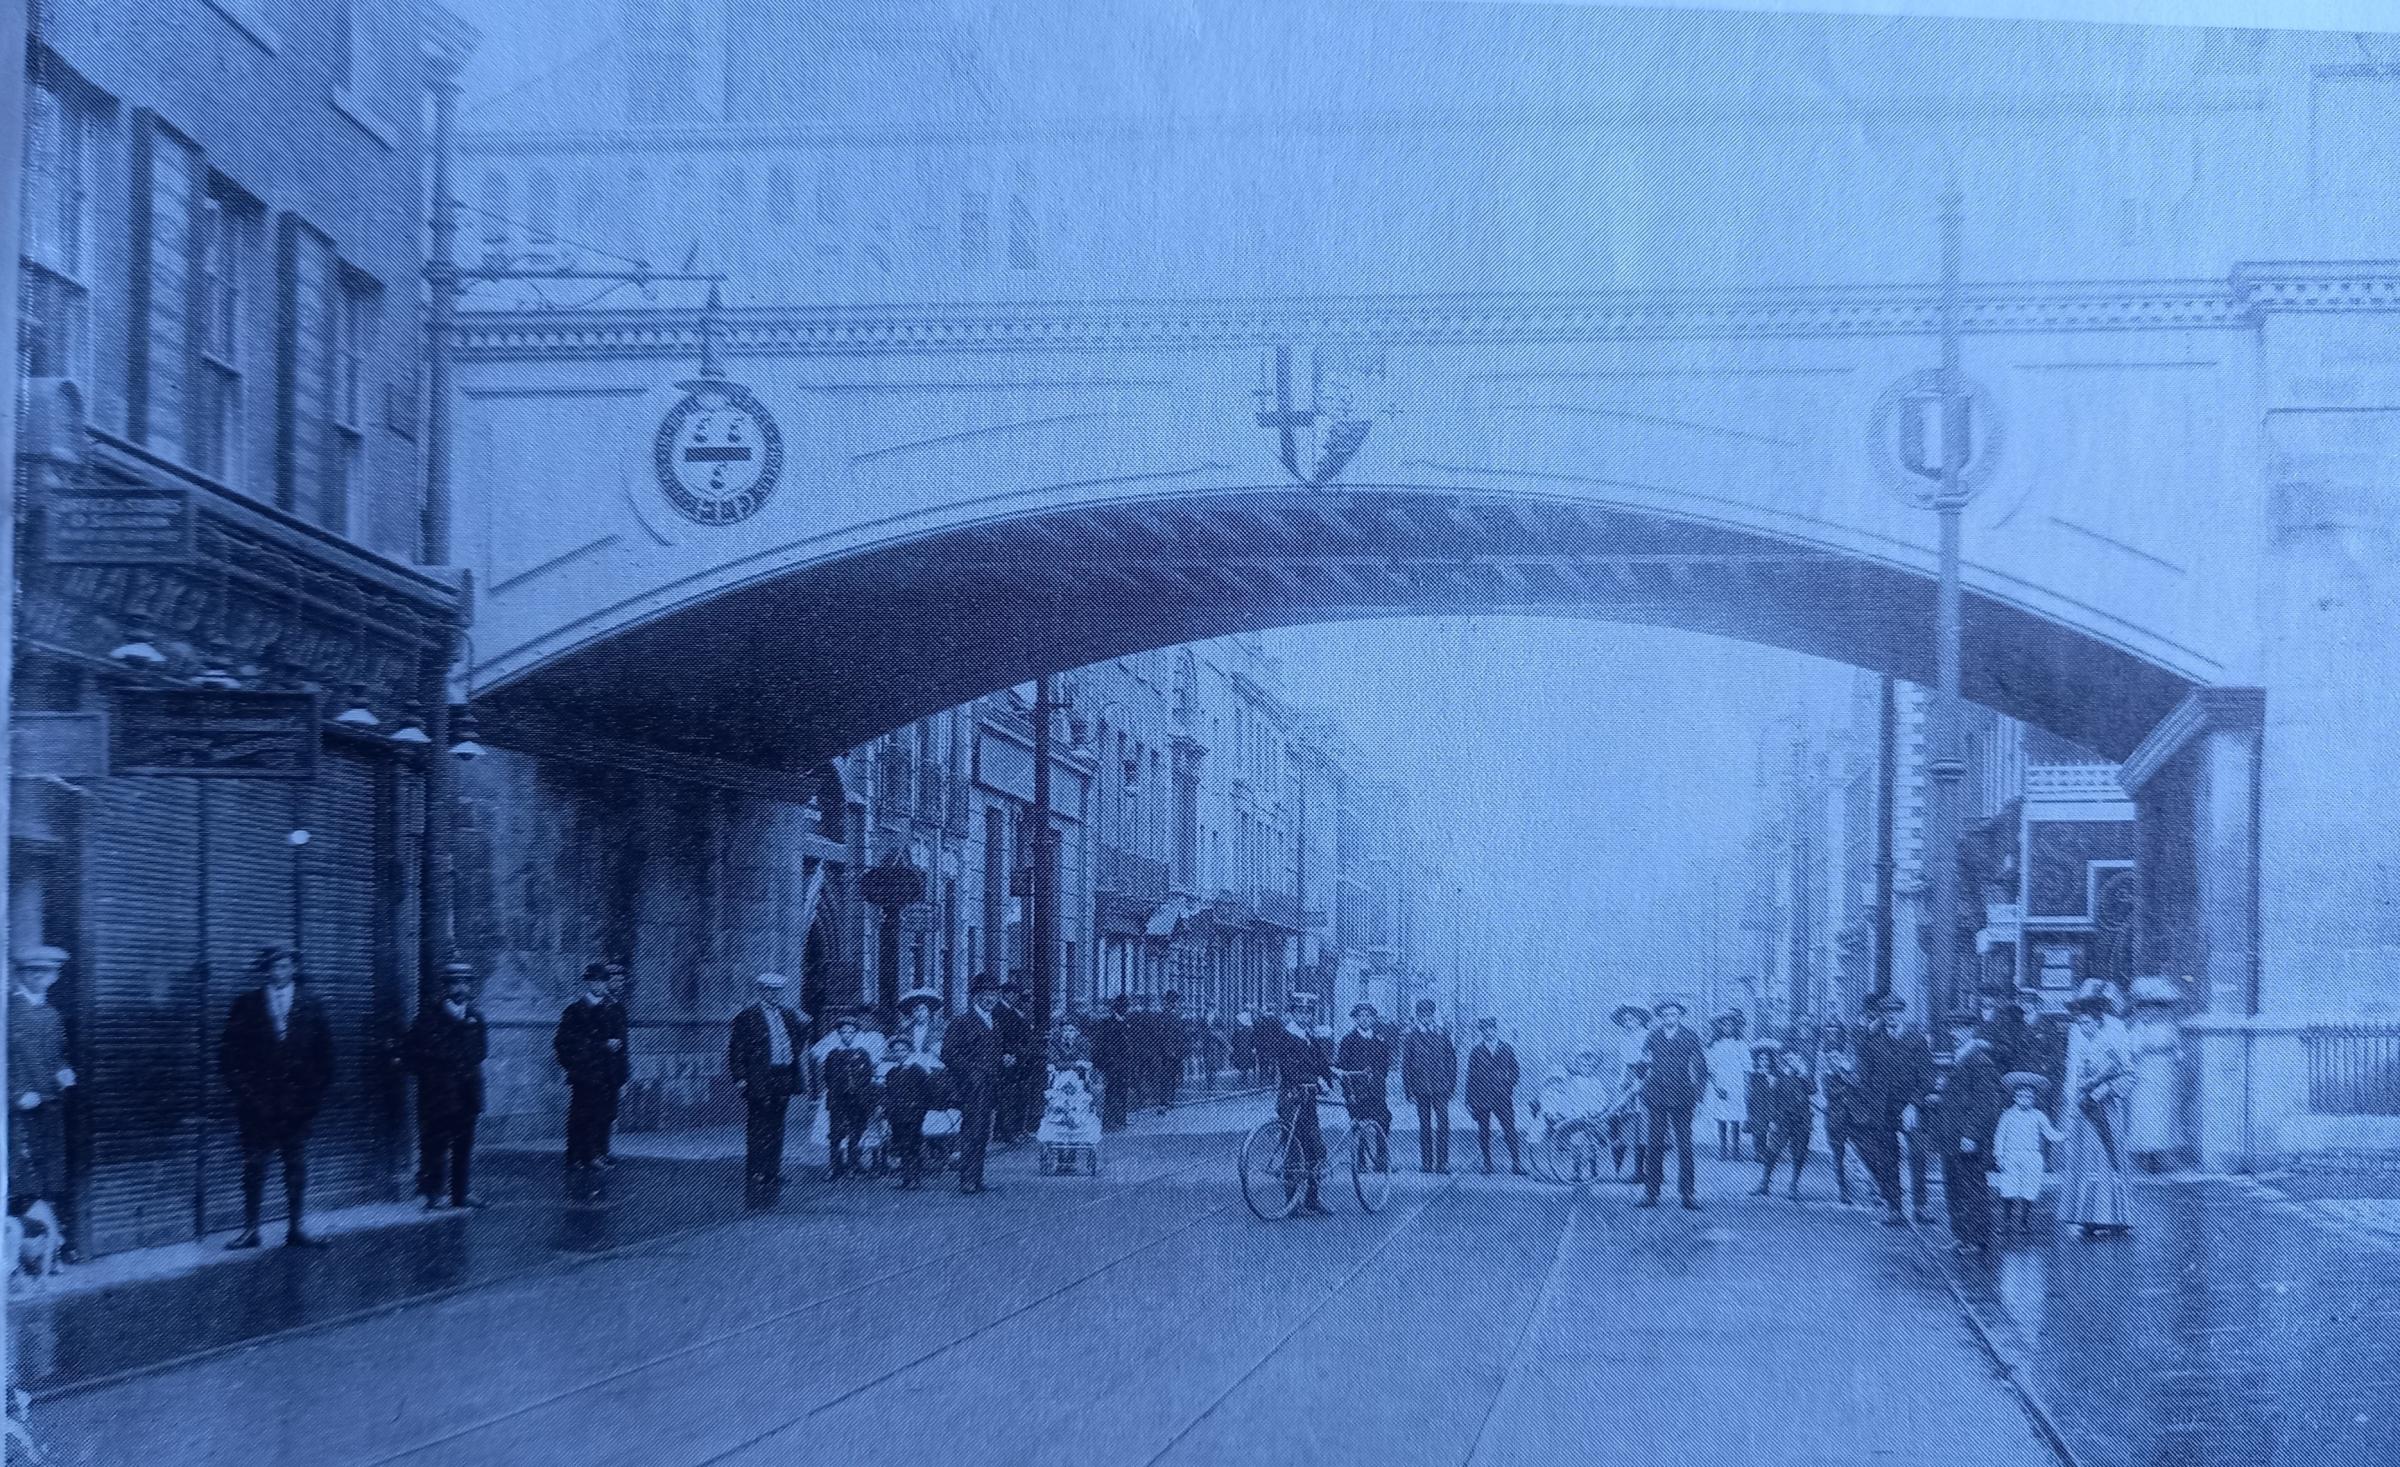 Foregate Street Railway bridge as refurbished in 1909. On the left, through the arch, is the Empire Music Hall. It became the Silver Cinema in 1915 and is now the Odeon